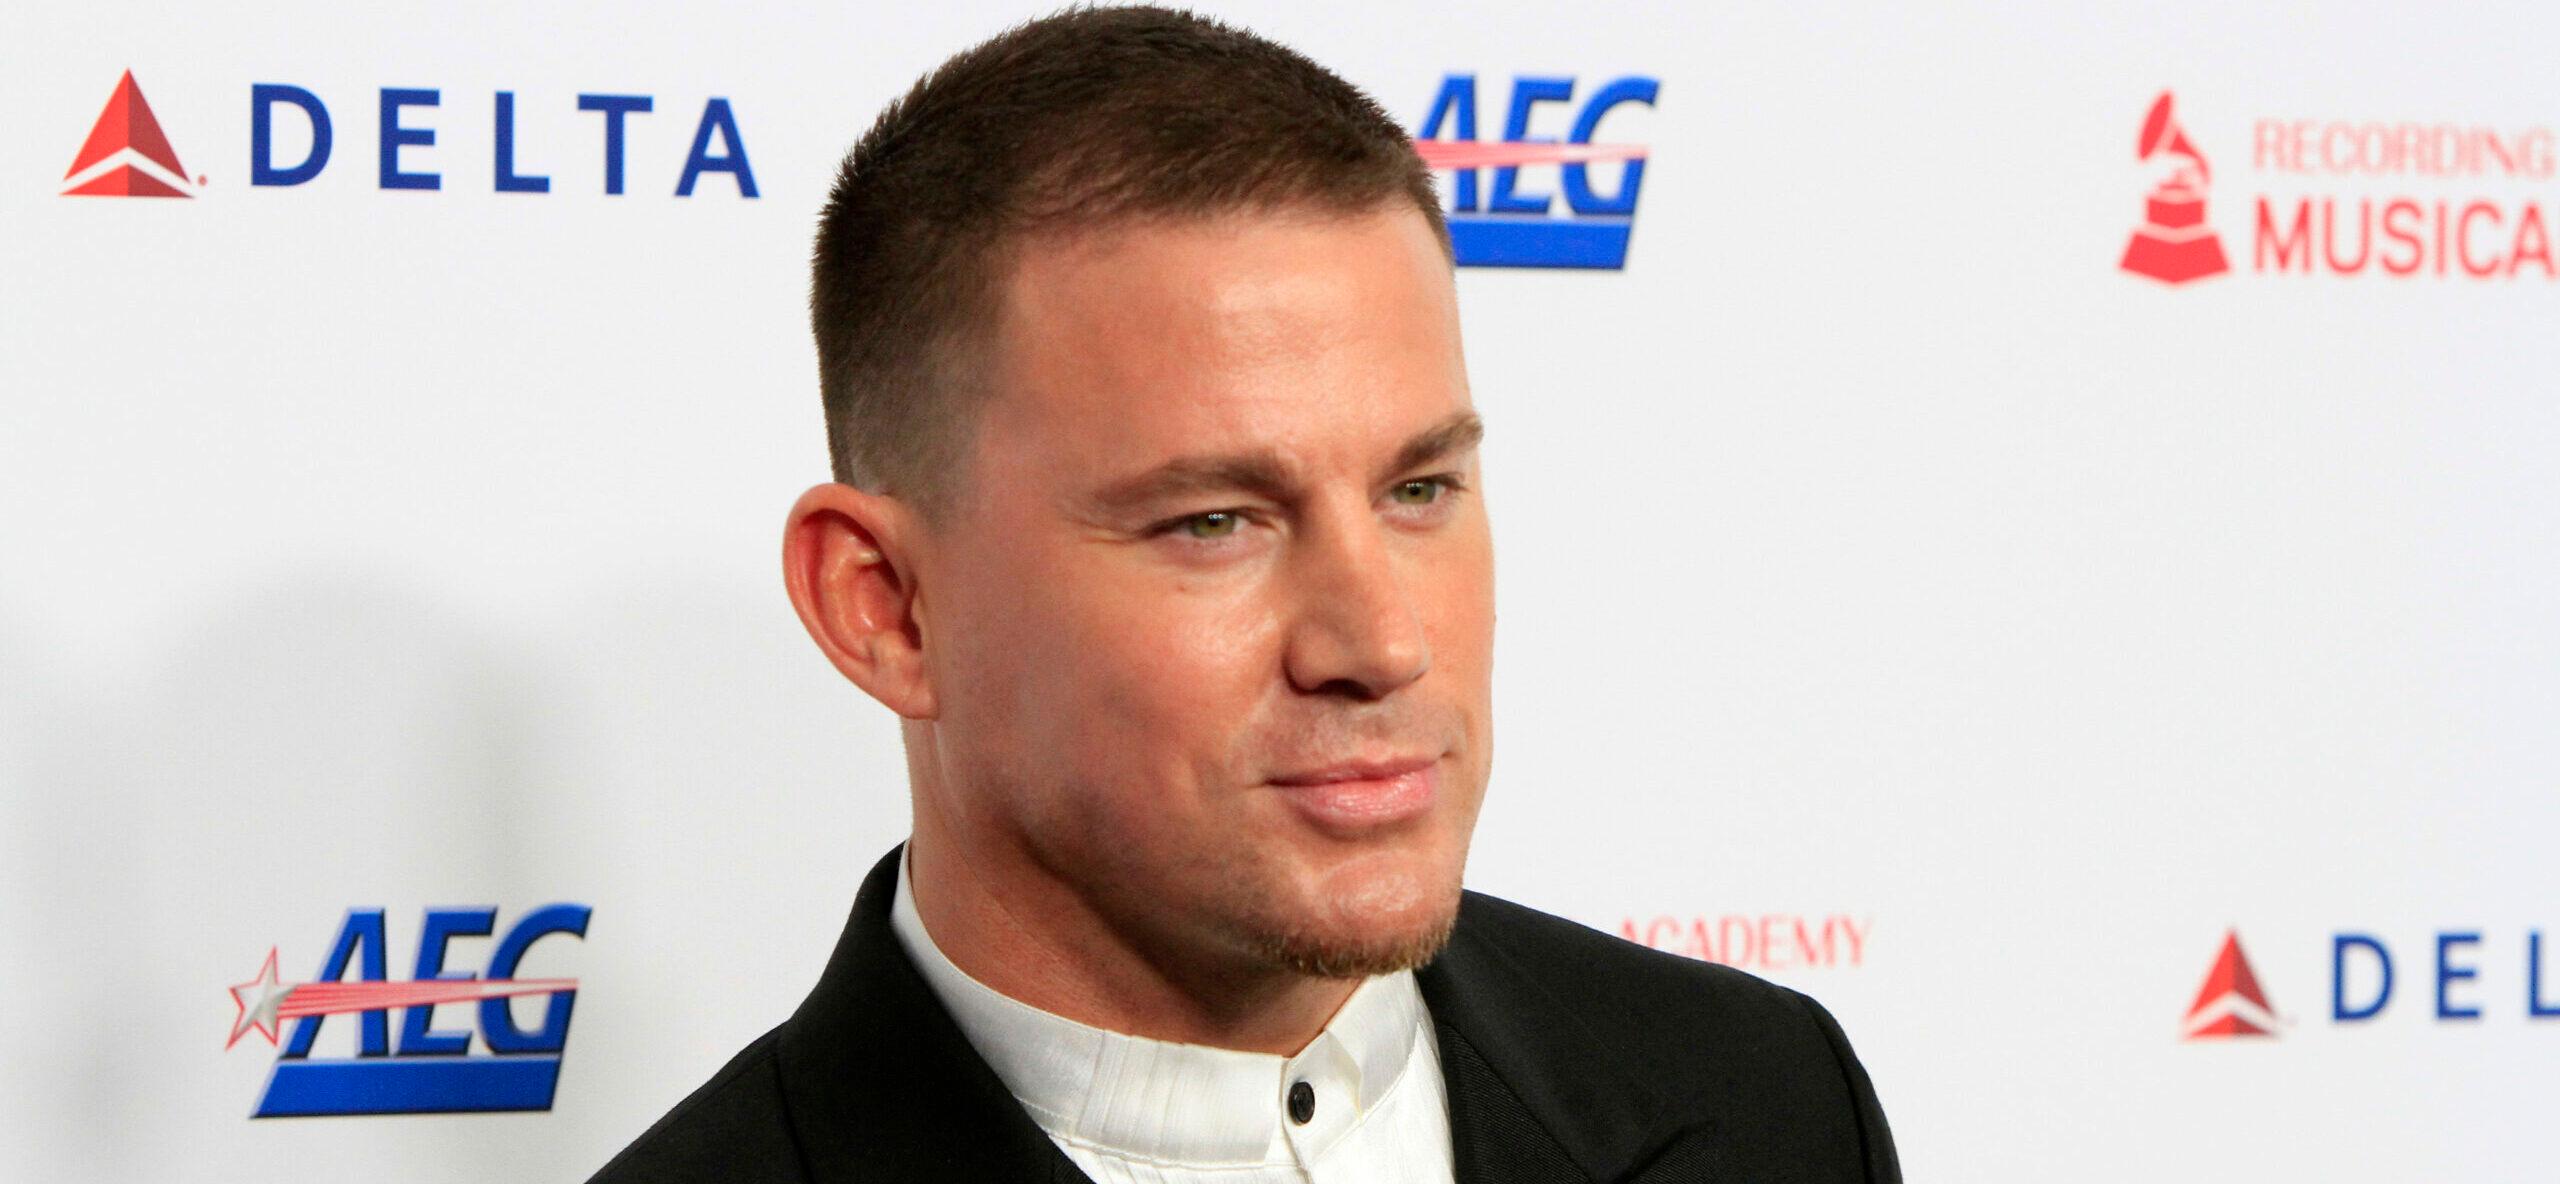 LOS ANGELES - JAN 24: Channing Tatum at the 2020 Muiscares at the Los Angeles Convention Center on January 24, 2020